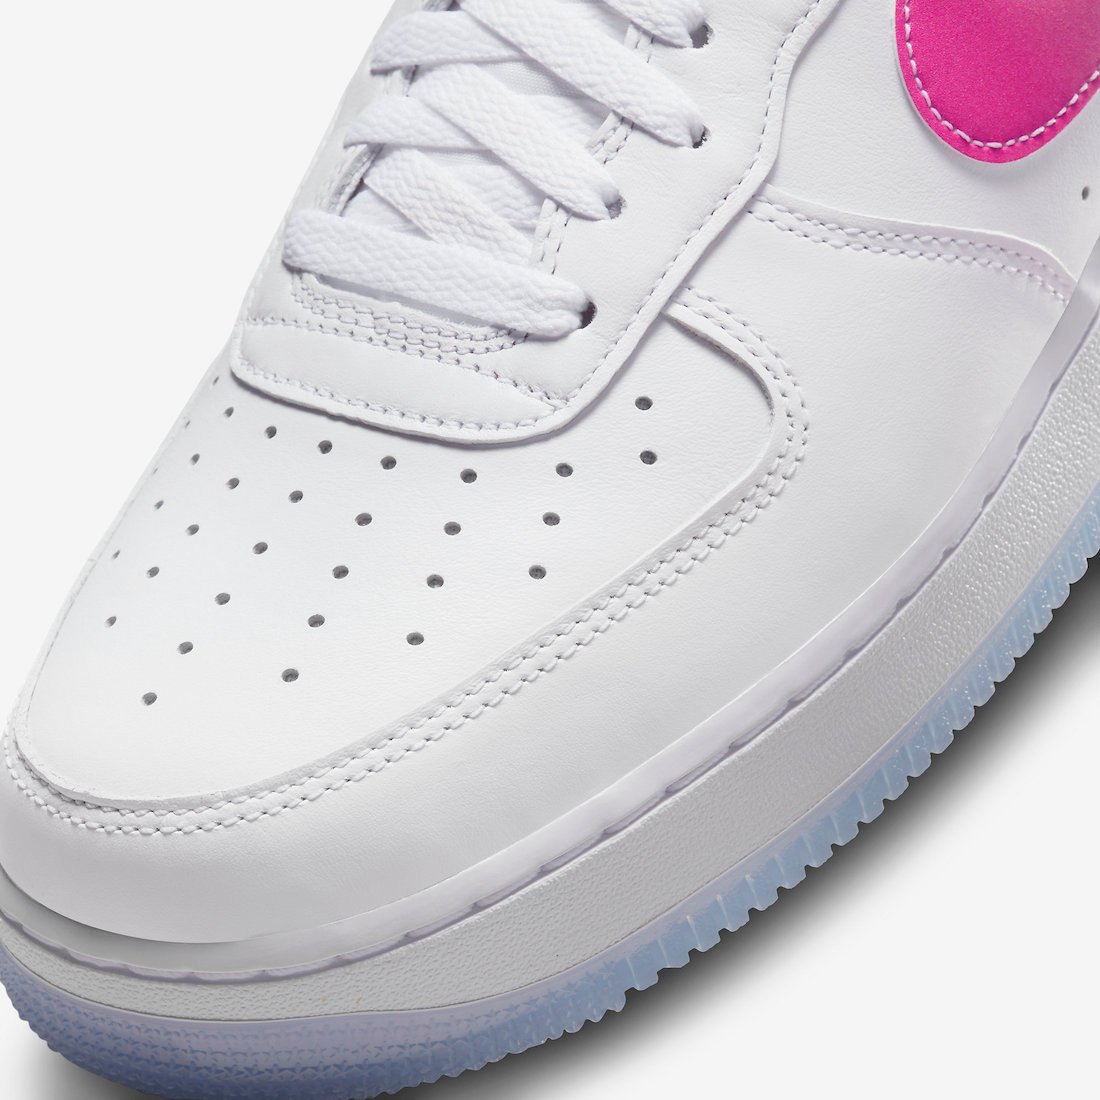 Nike Air Force 1 Low San Francisco Chinatown FD0778-100 Release Date